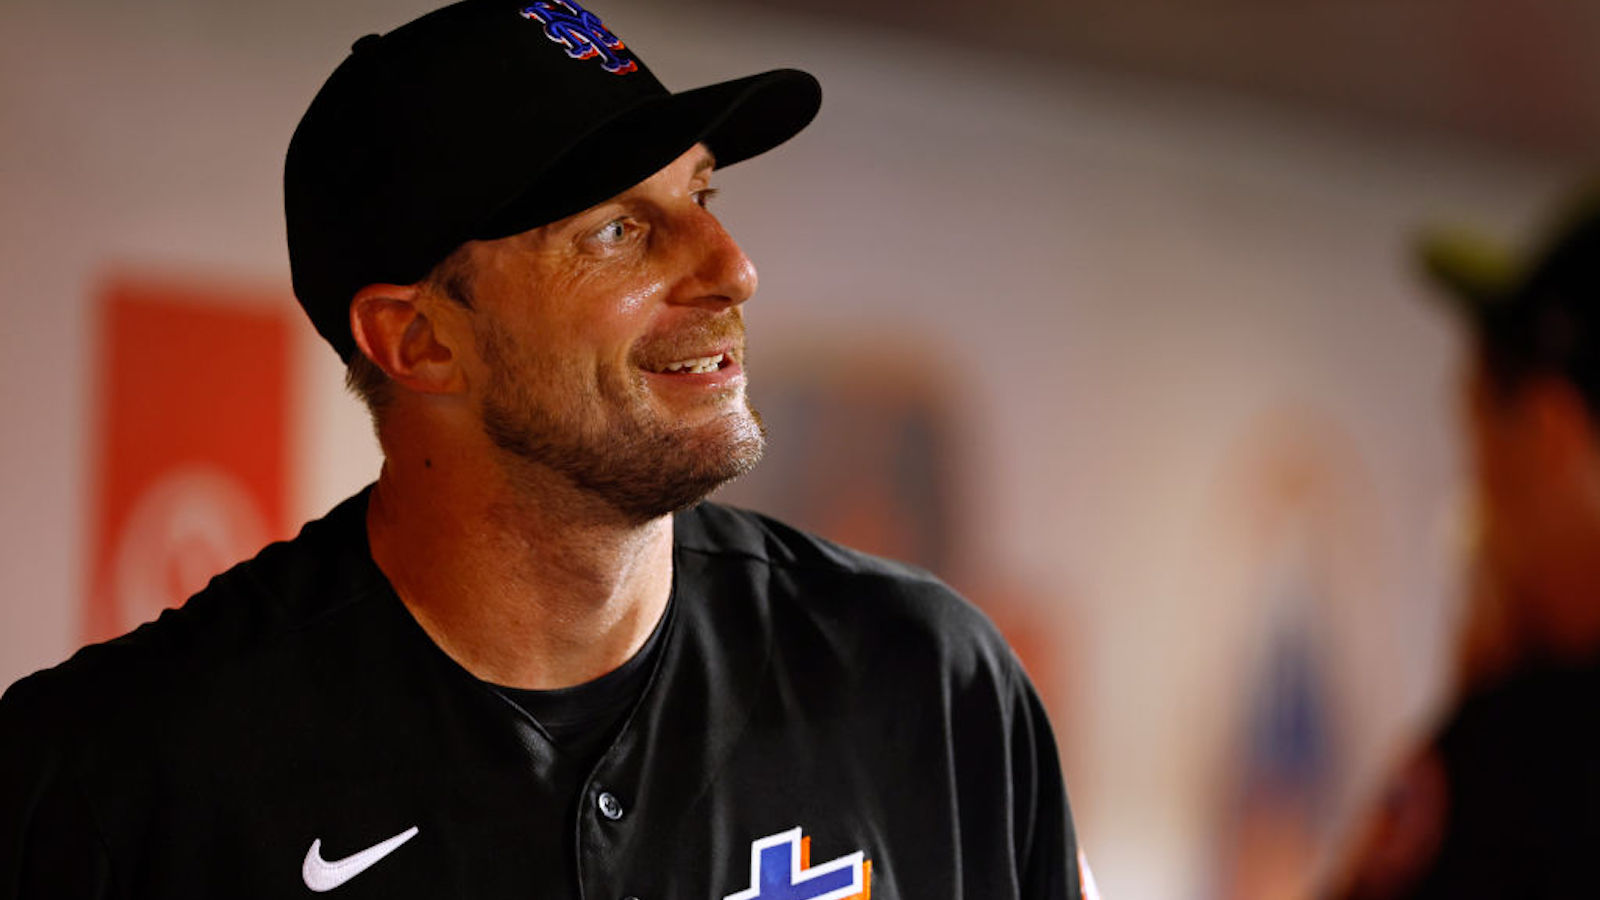 Max Scherzer Sells Team Out, Reveals Plans For Next Year